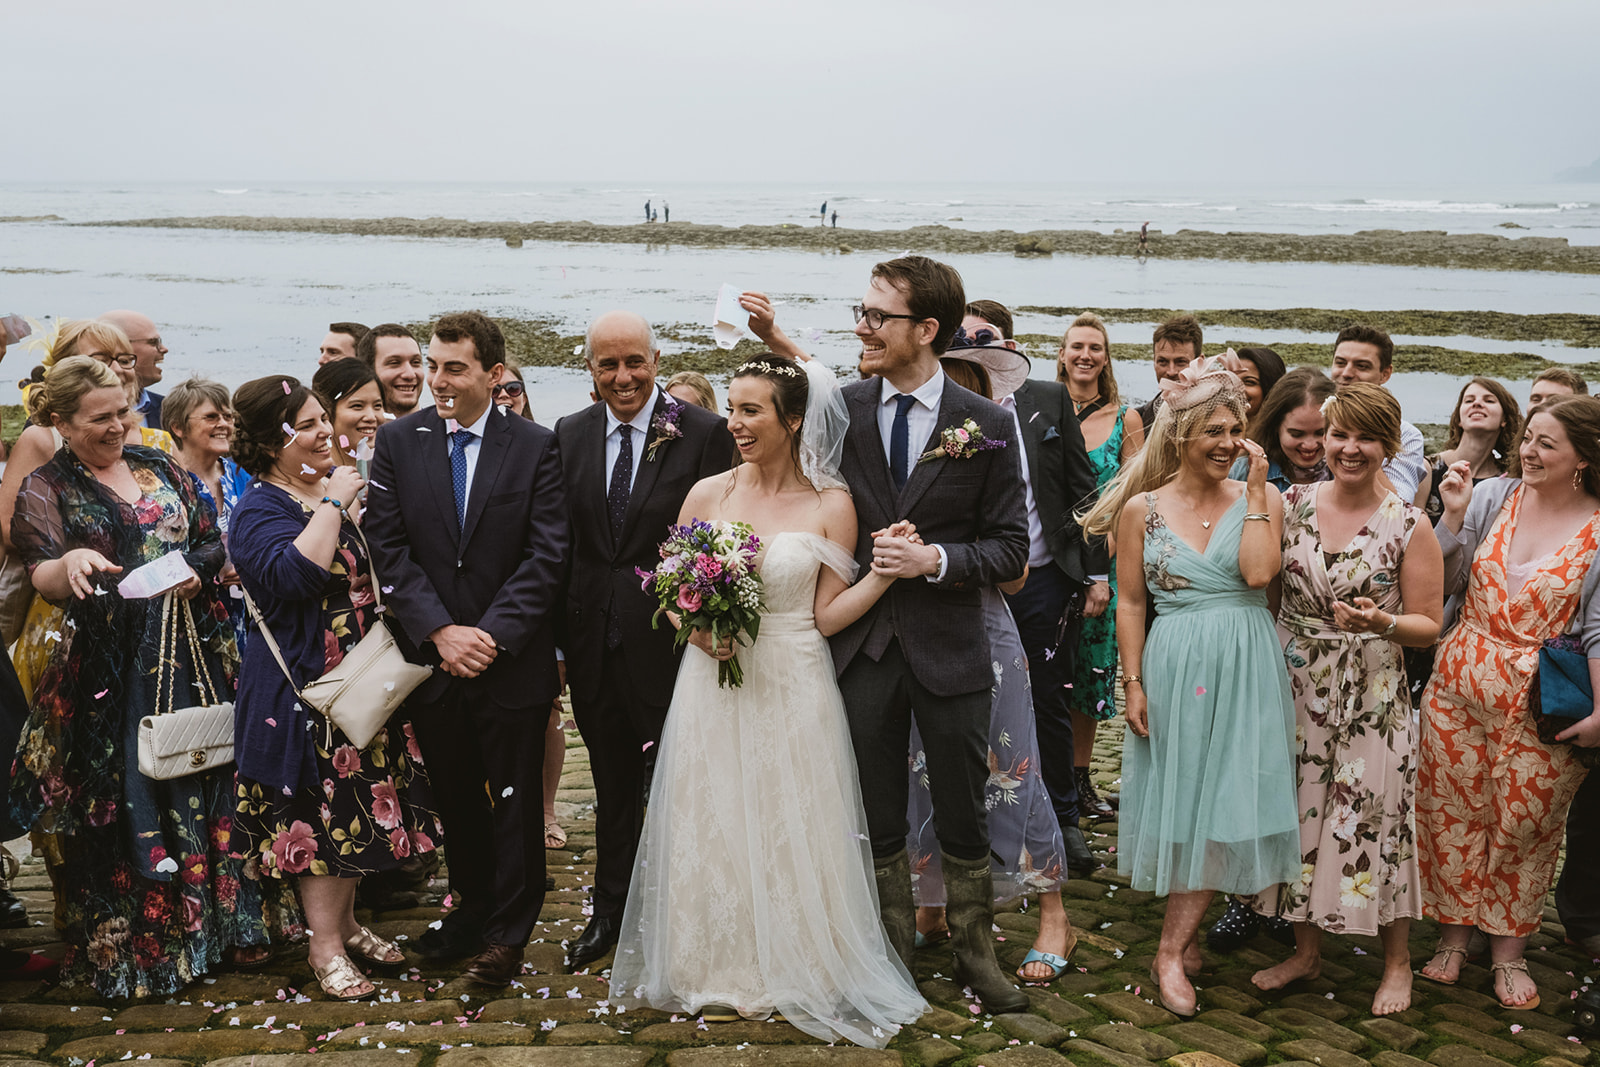 Natalie and Luke's happy and authentic Yorkshire wedding with York Place Studios who are London wedding photographers